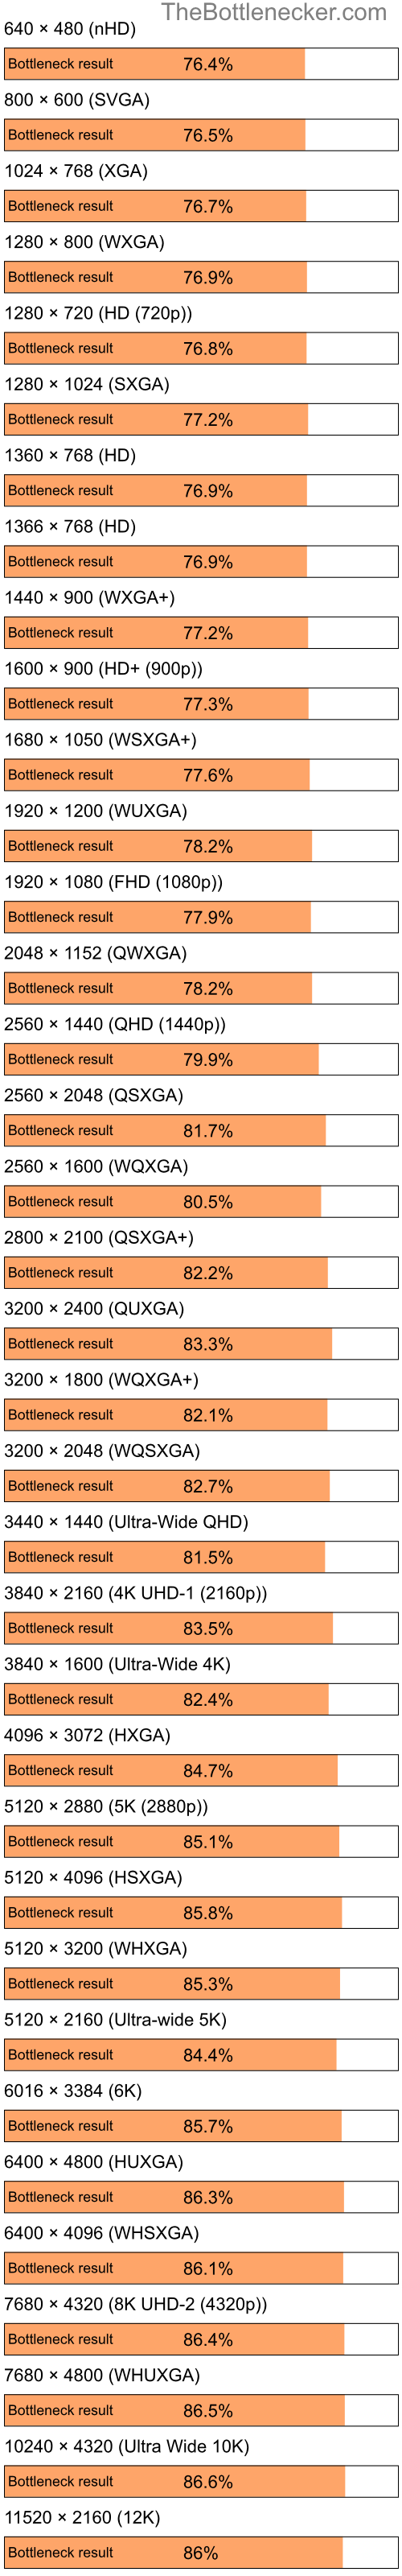 Bottleneck results by resolution for Intel Pentium 4 and AMD Mobility Radeon X1400 in7 Days to Die